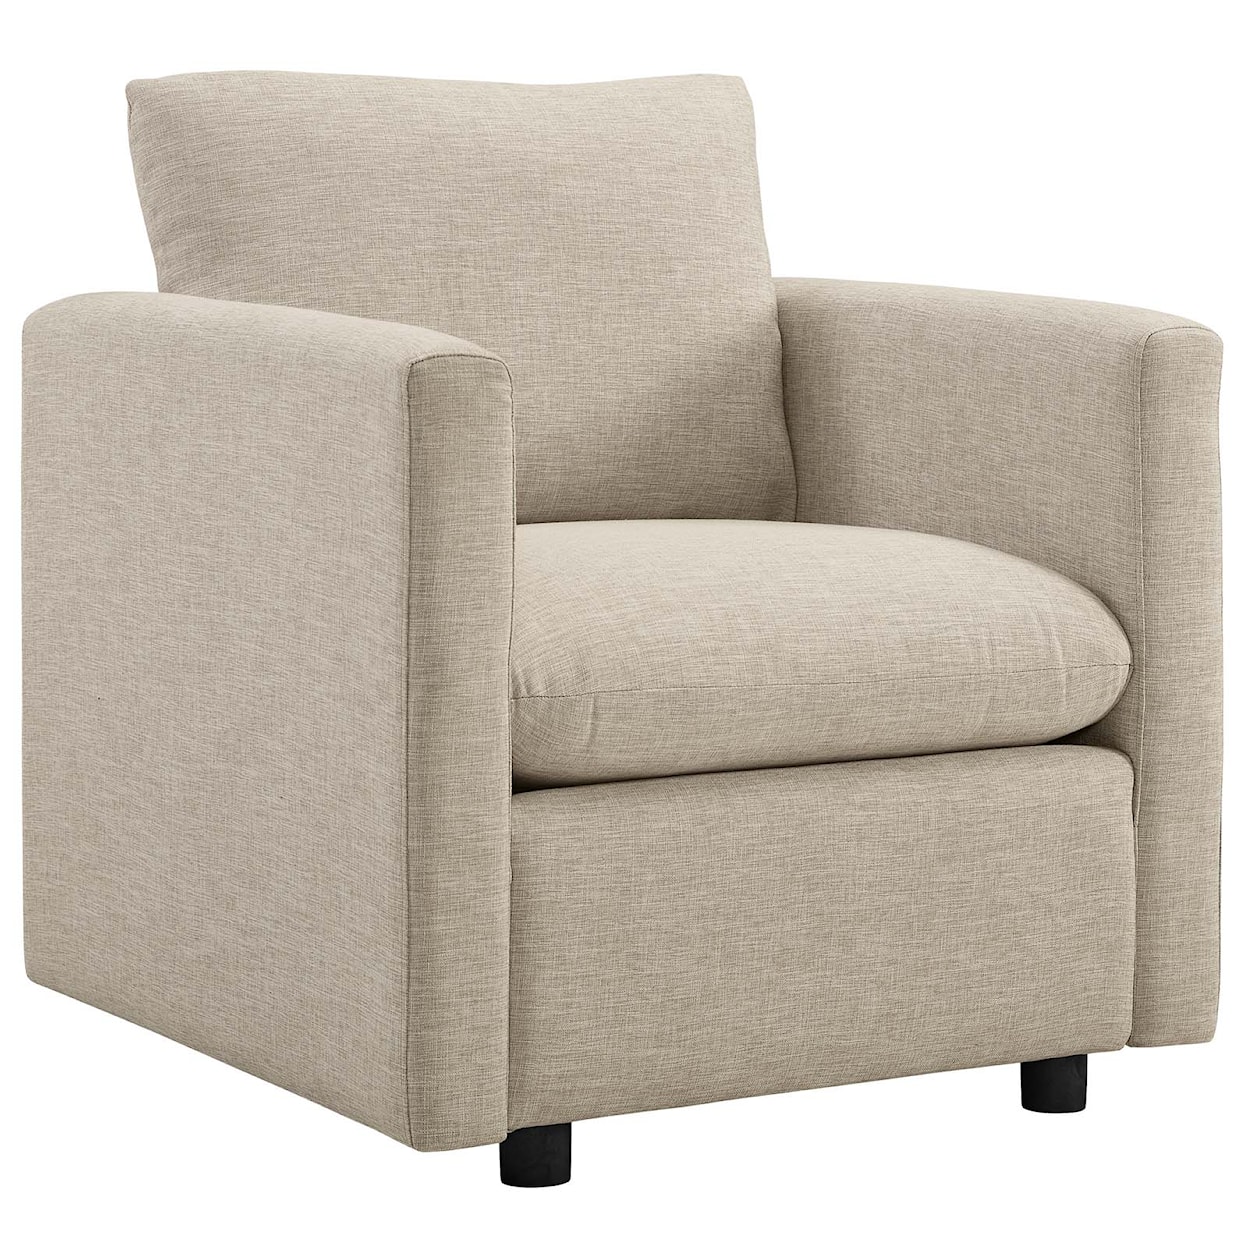 Modway Activate Sofa and Armchair Set